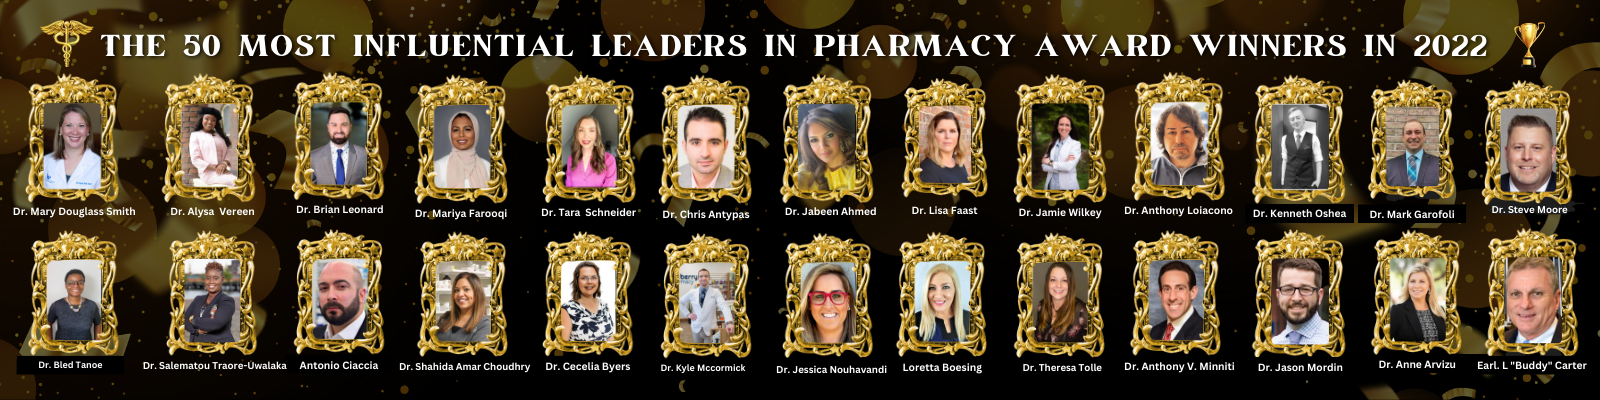 The 50 Most Influential Leaders in Pharmacy Awards 2023